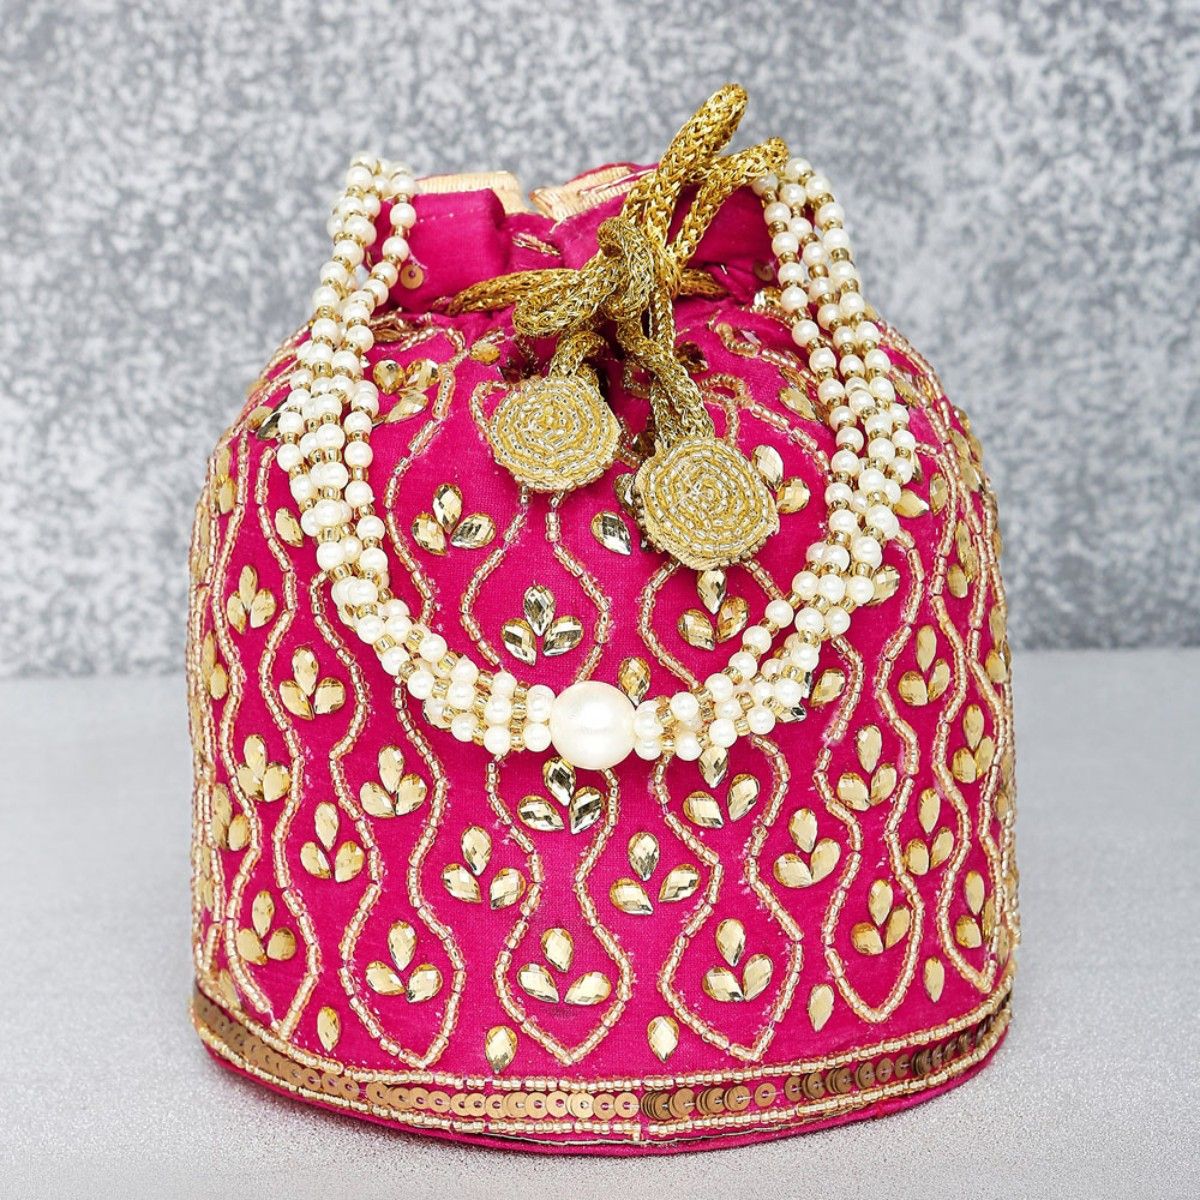 Bridal Purses In Kolkata, West Bengal At Best Price | Bridal Purses  Manufacturers, Suppliers In Calcutta